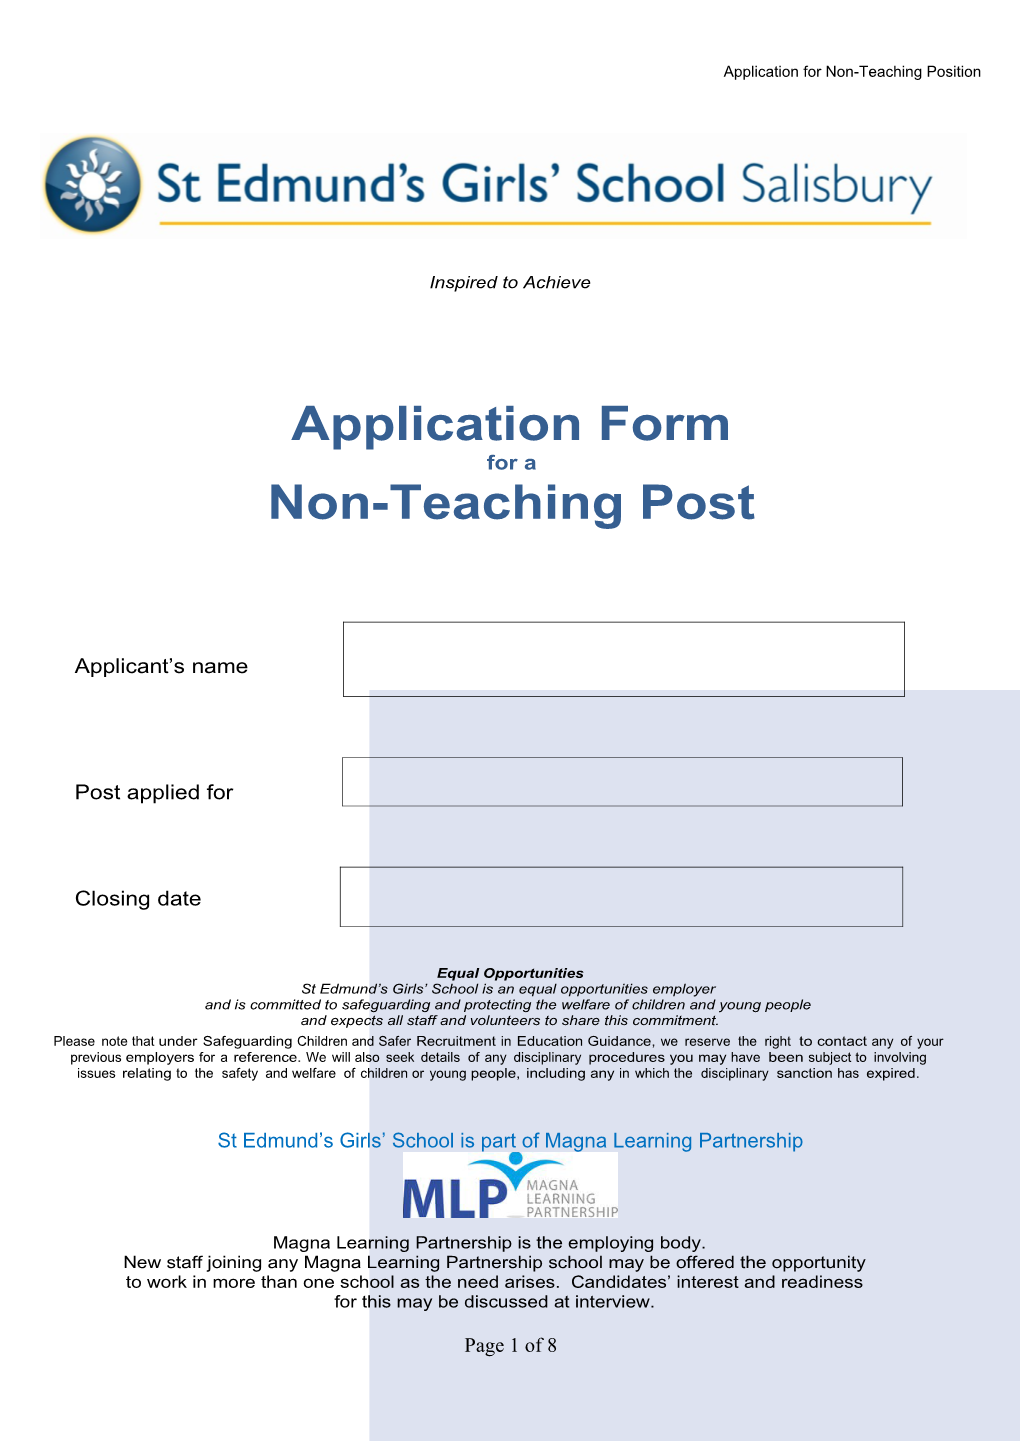 Application for Non-Teaching Position